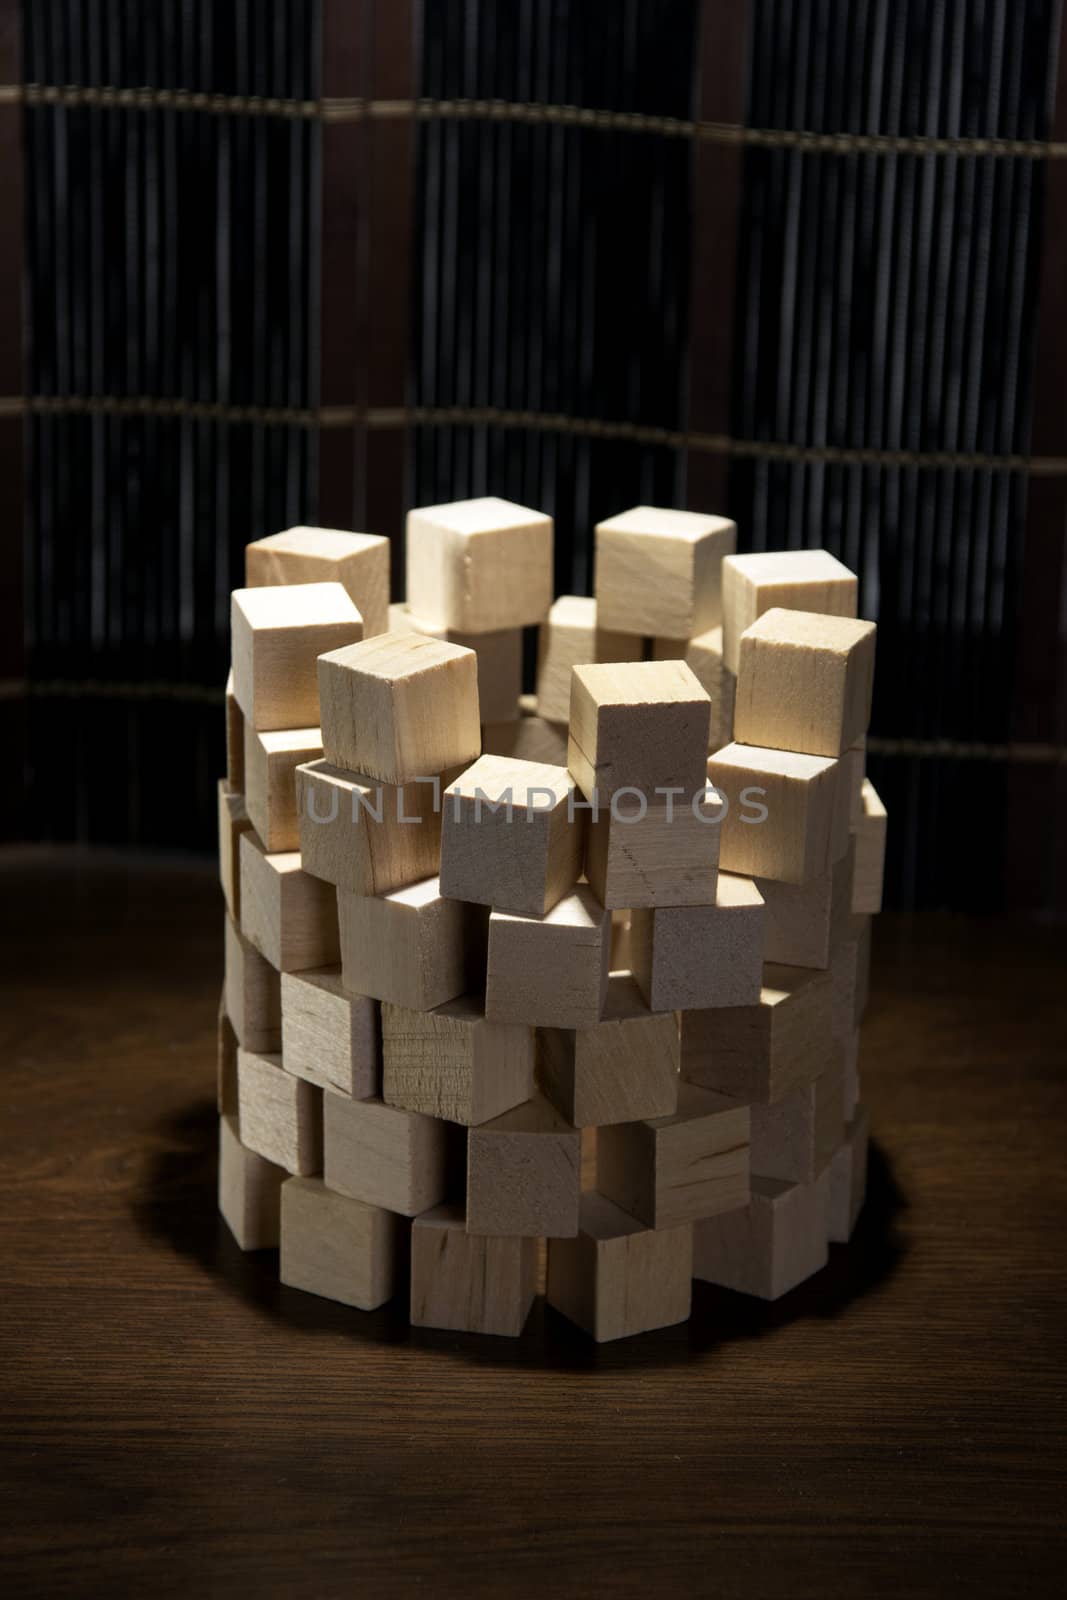 Tower of wooden blocks, built on a wooden surface